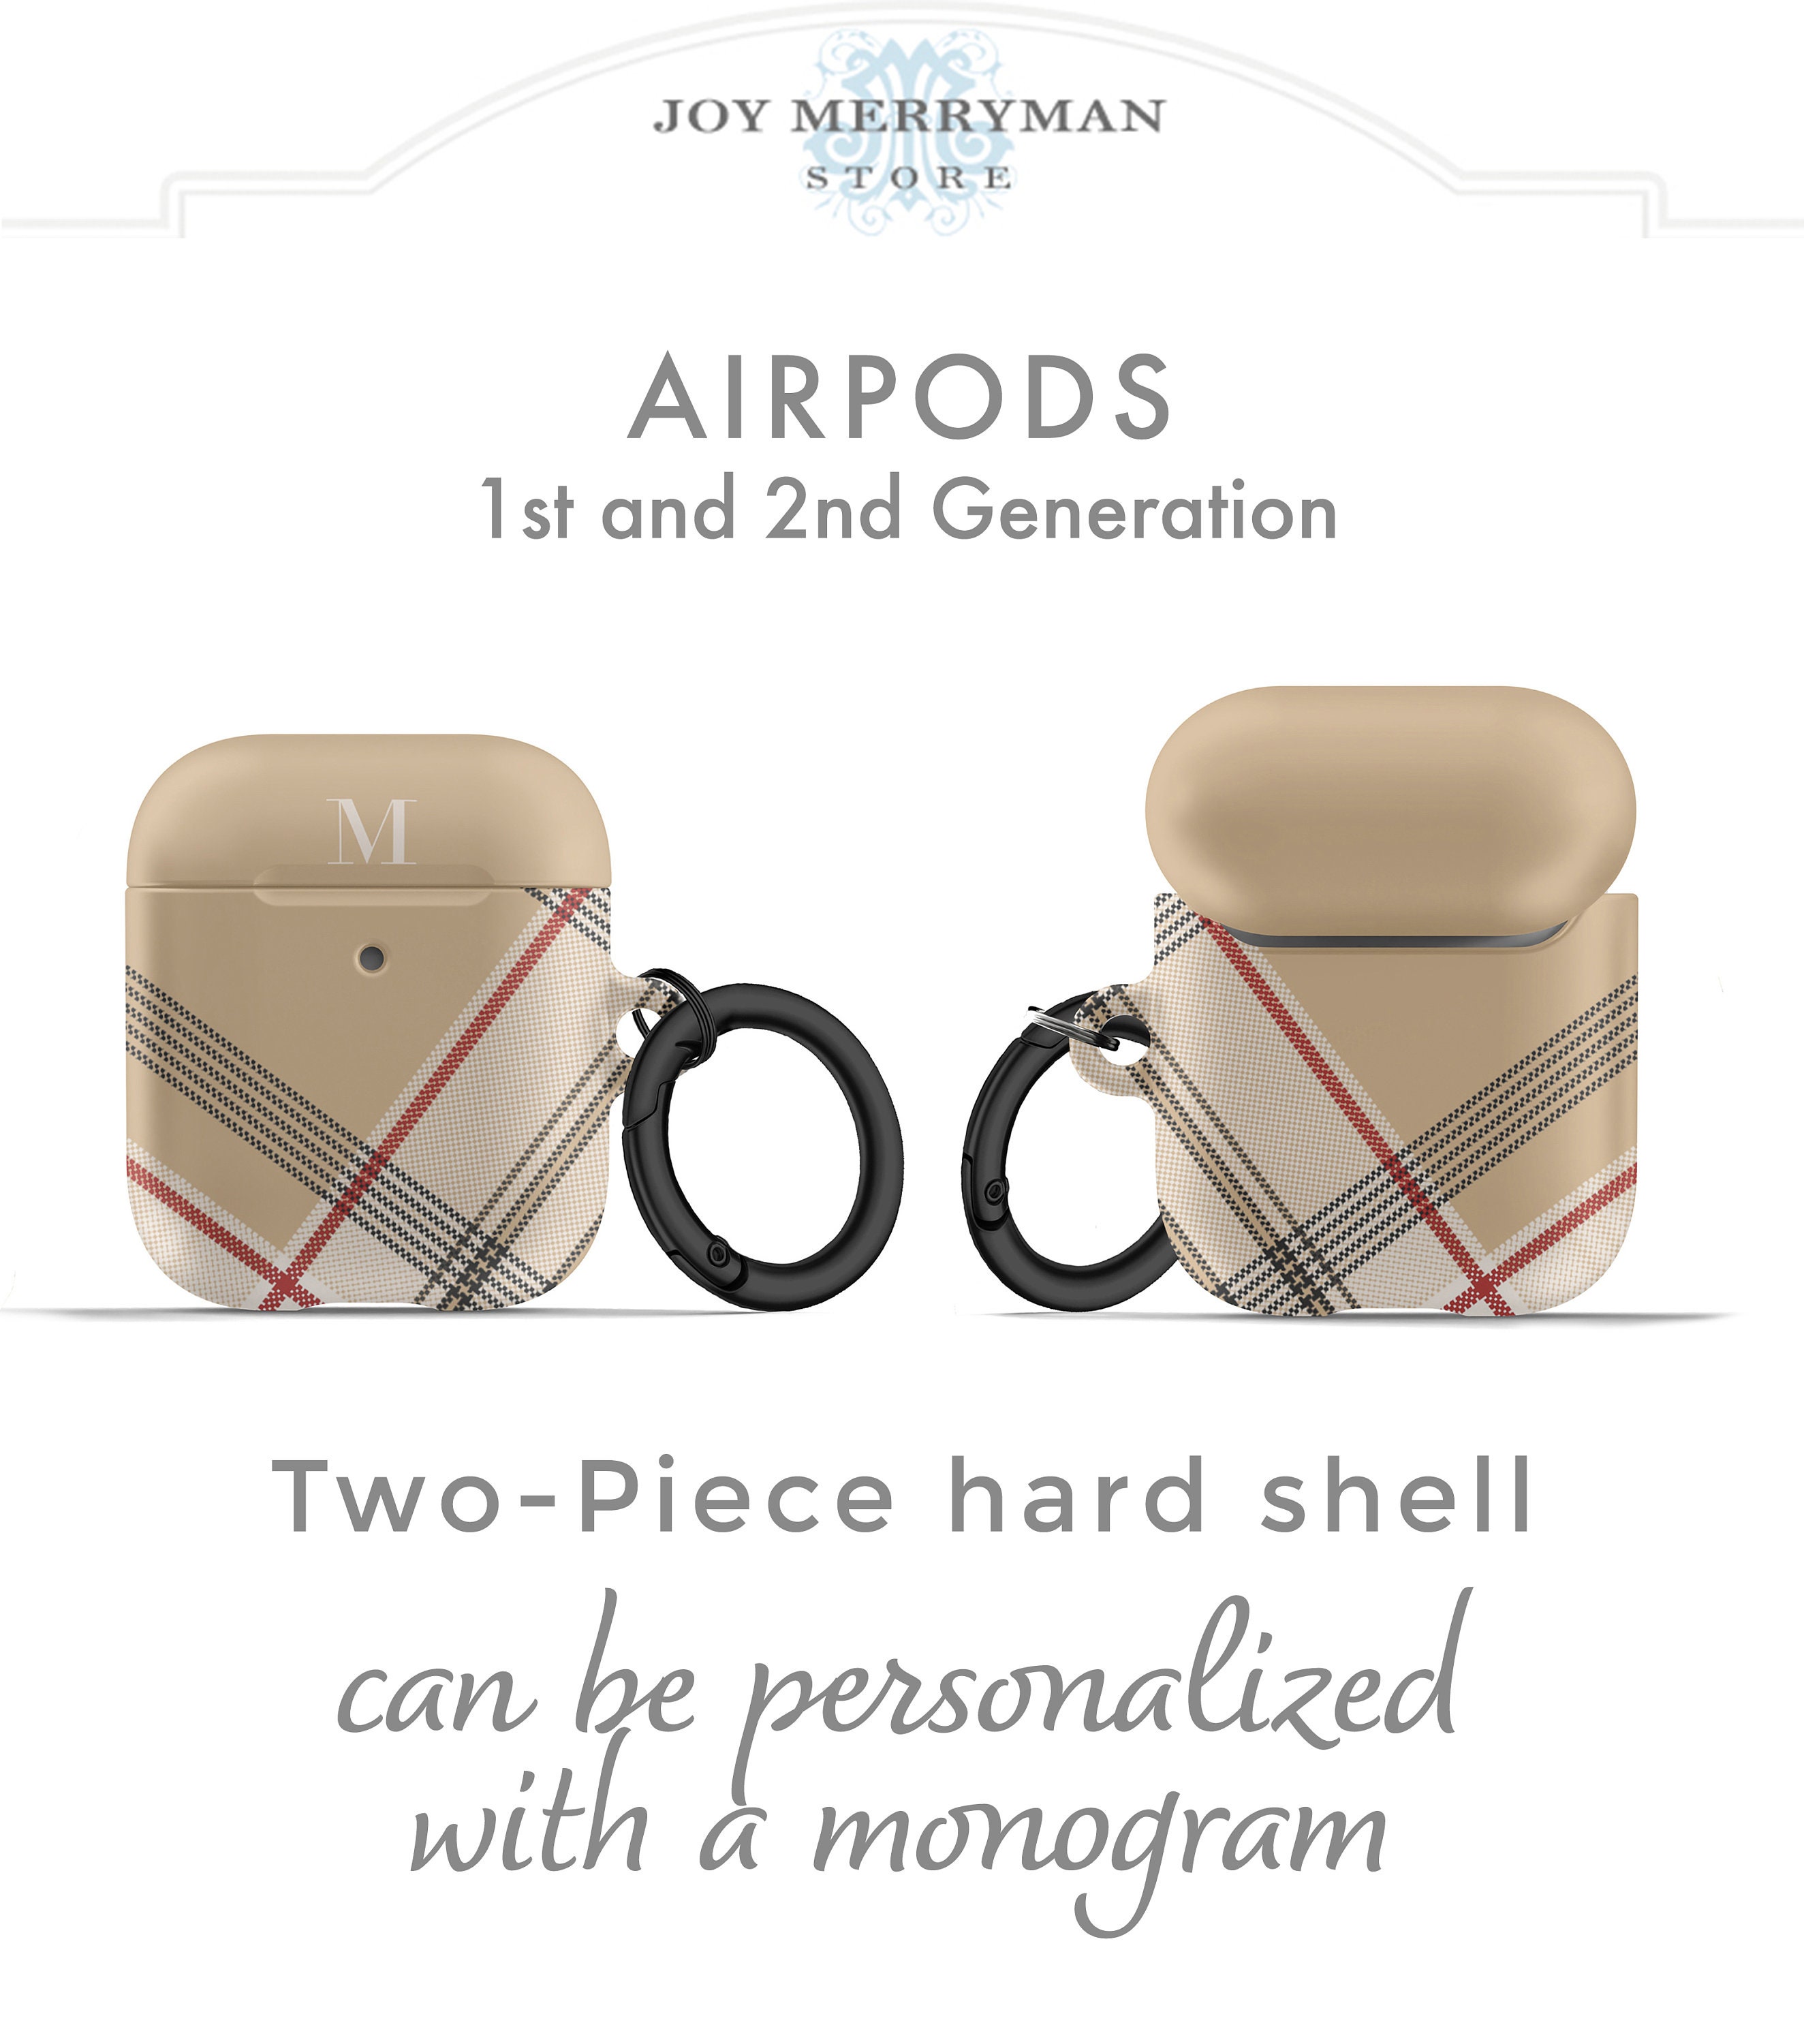 Burberry Check AirPods Pro Case